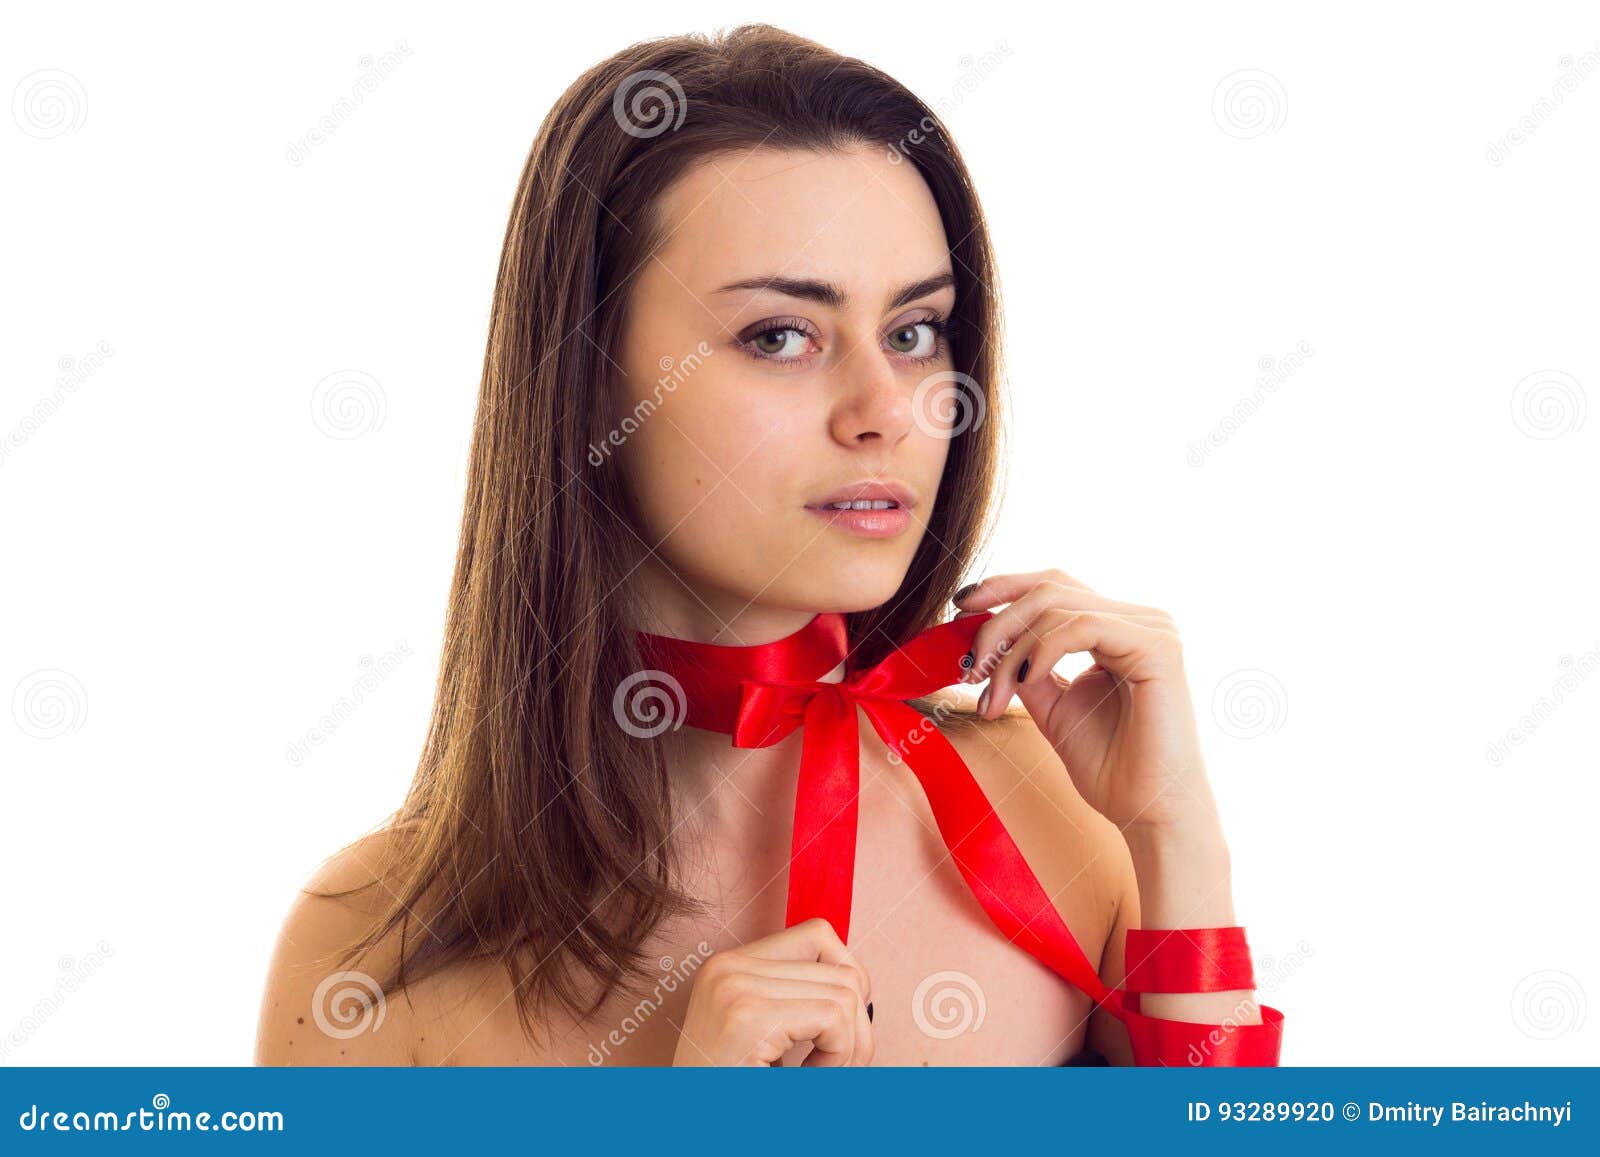 Black woman red bow naked Nude Woman Red Bow Photos Free Royalty Free Stock Photos From Dreamstime